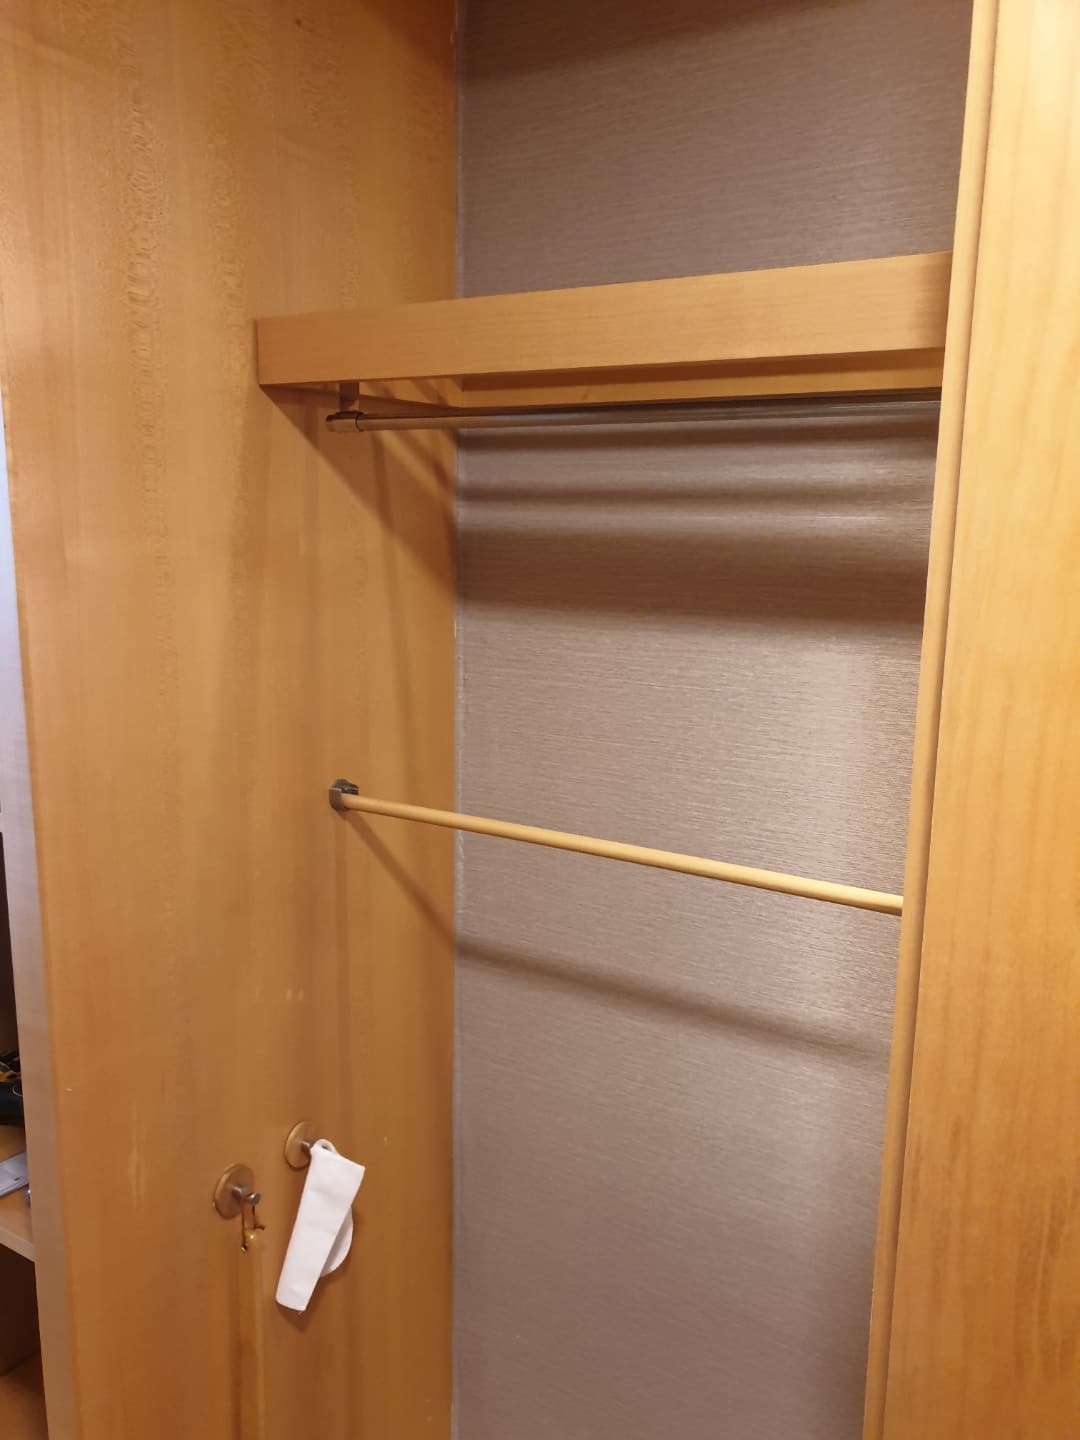 Superior guest room0 : Storage hanger in the guestroom 